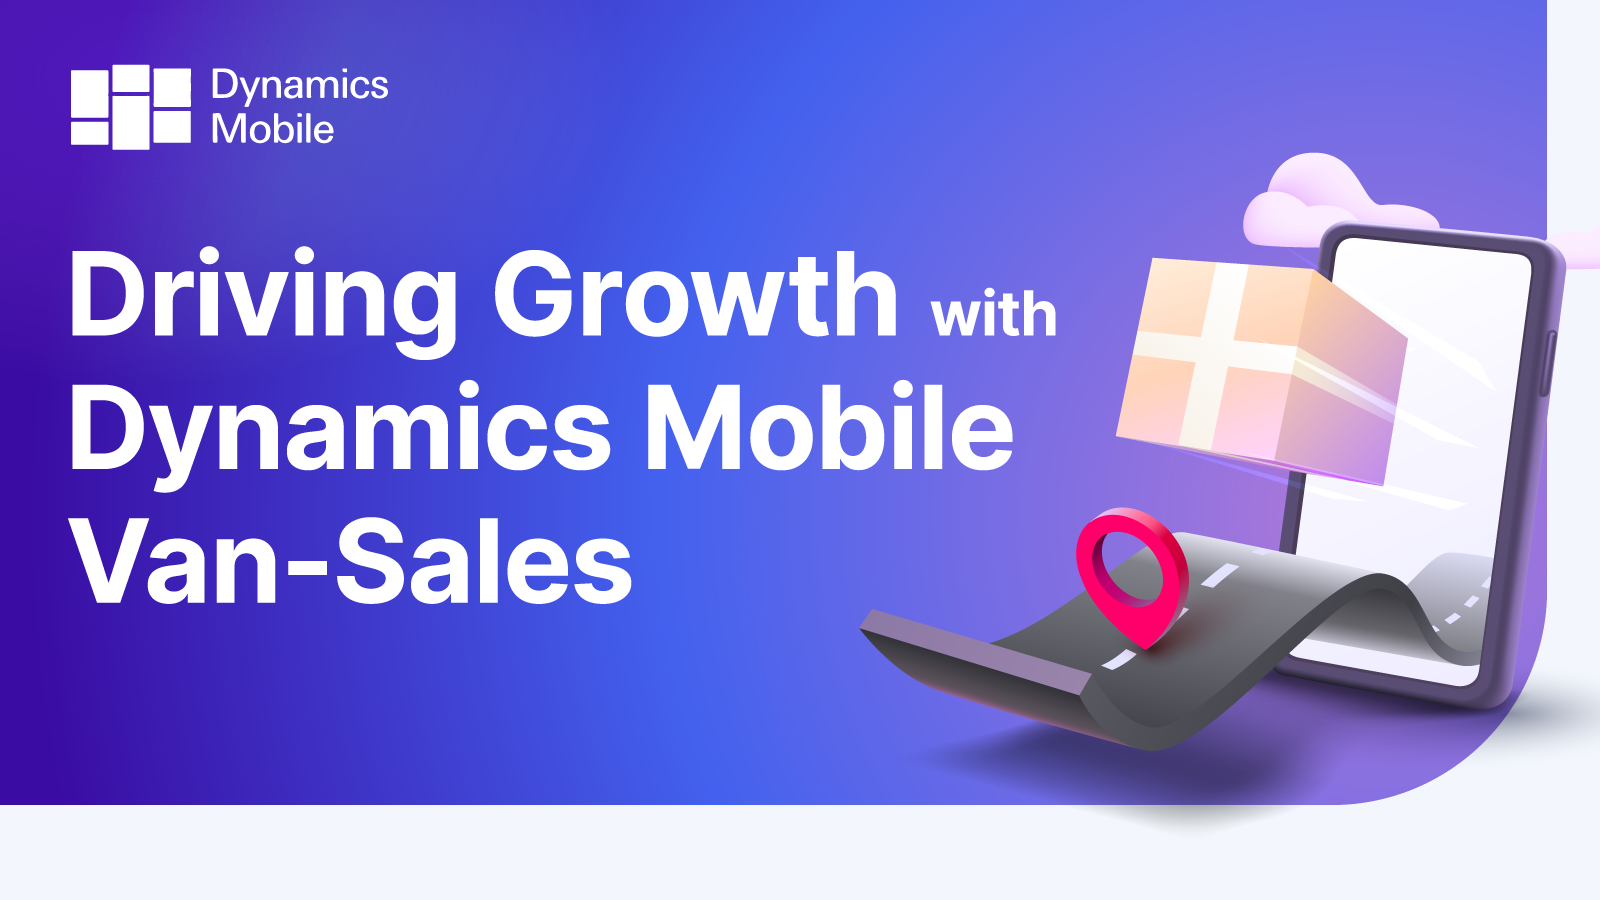 Driving Growth with Dynamics Mobile Van-Sales